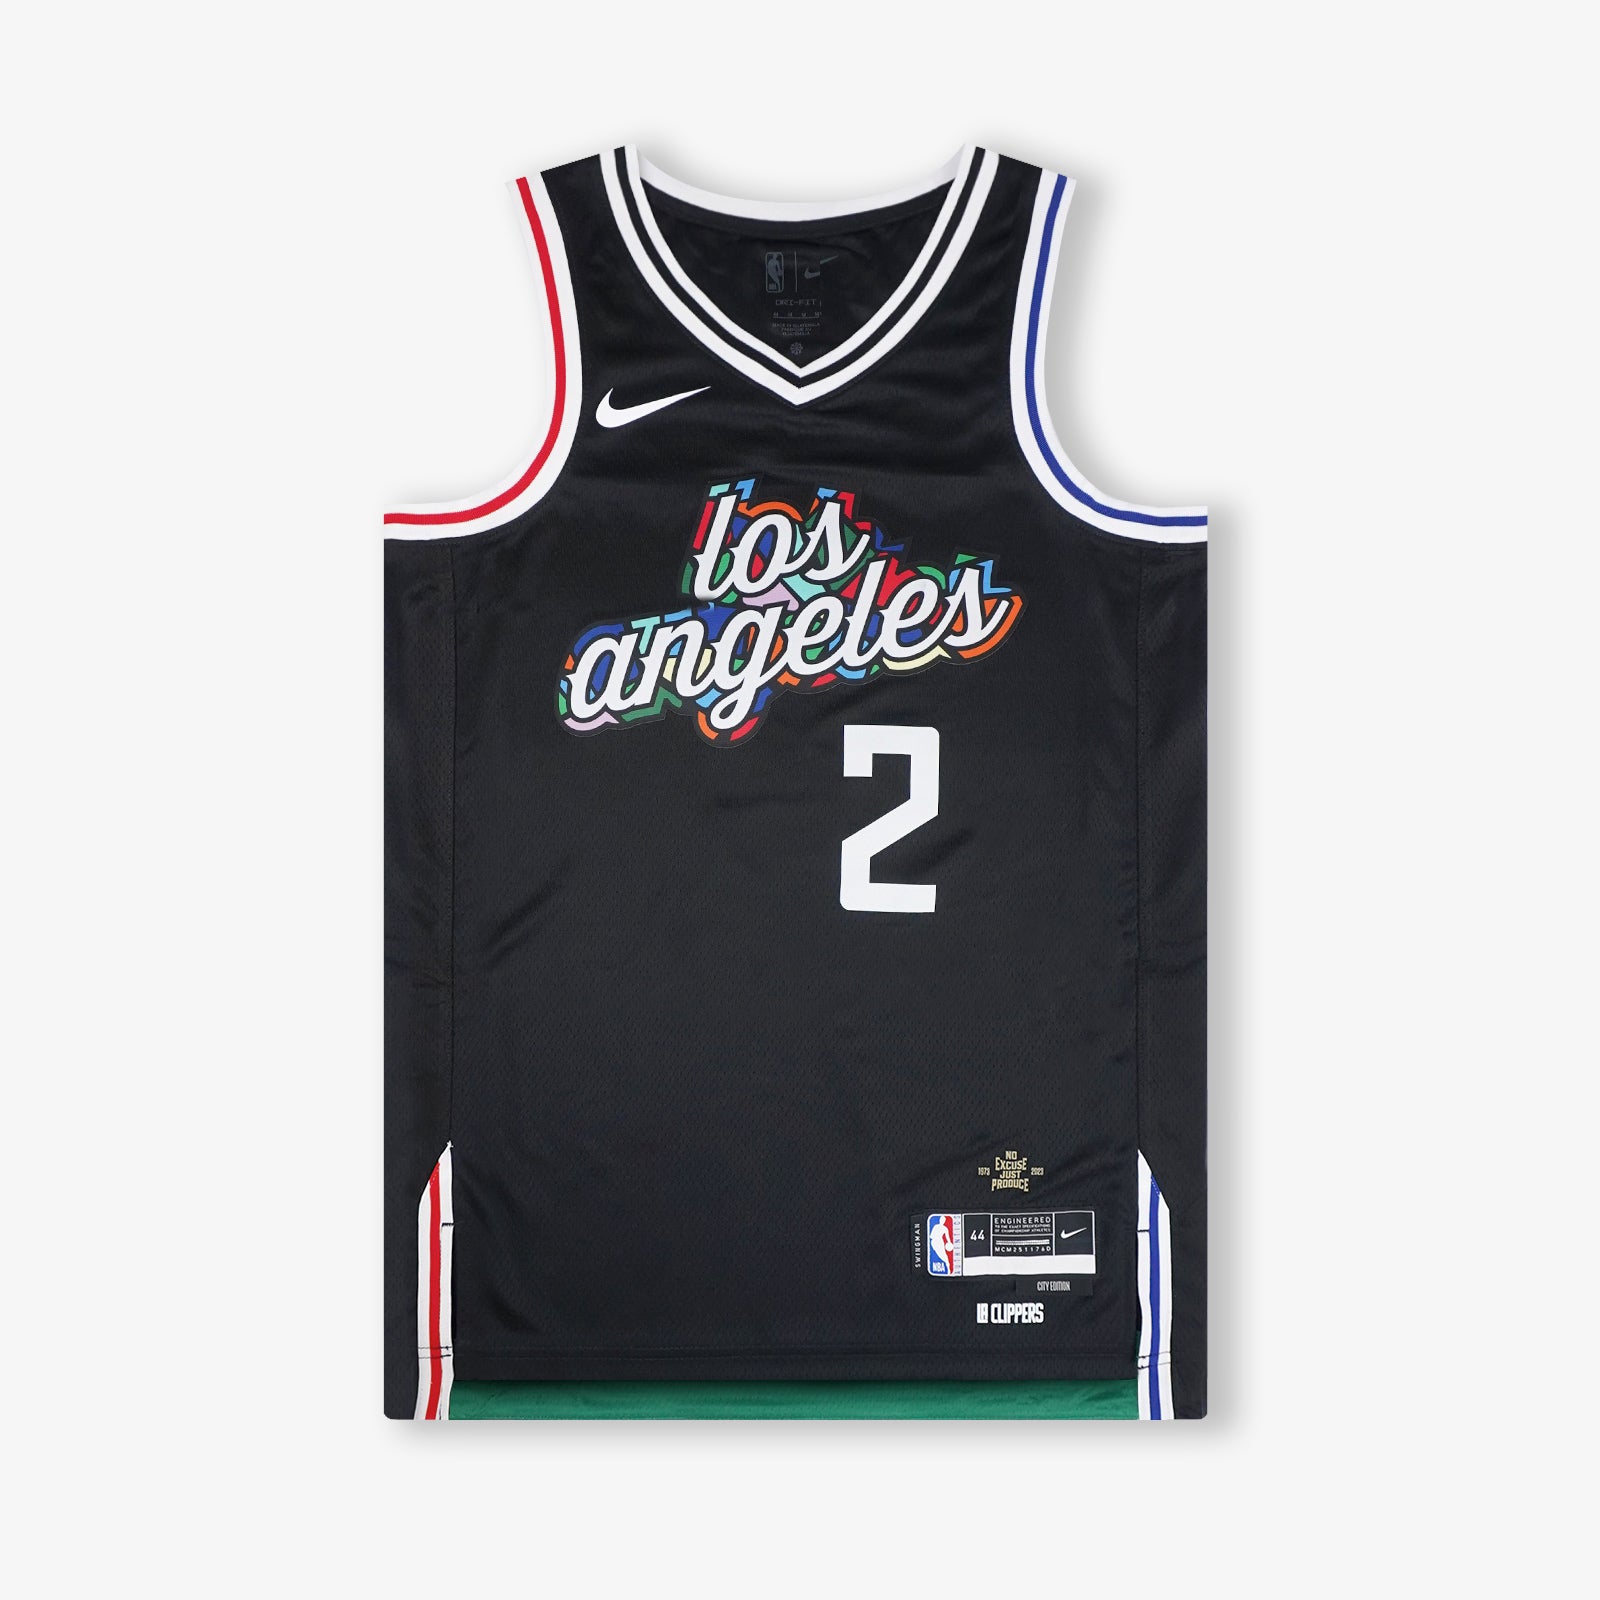 NBA 2K22 Los Angeles Clippers 2018 City Edition Jersey by Dove